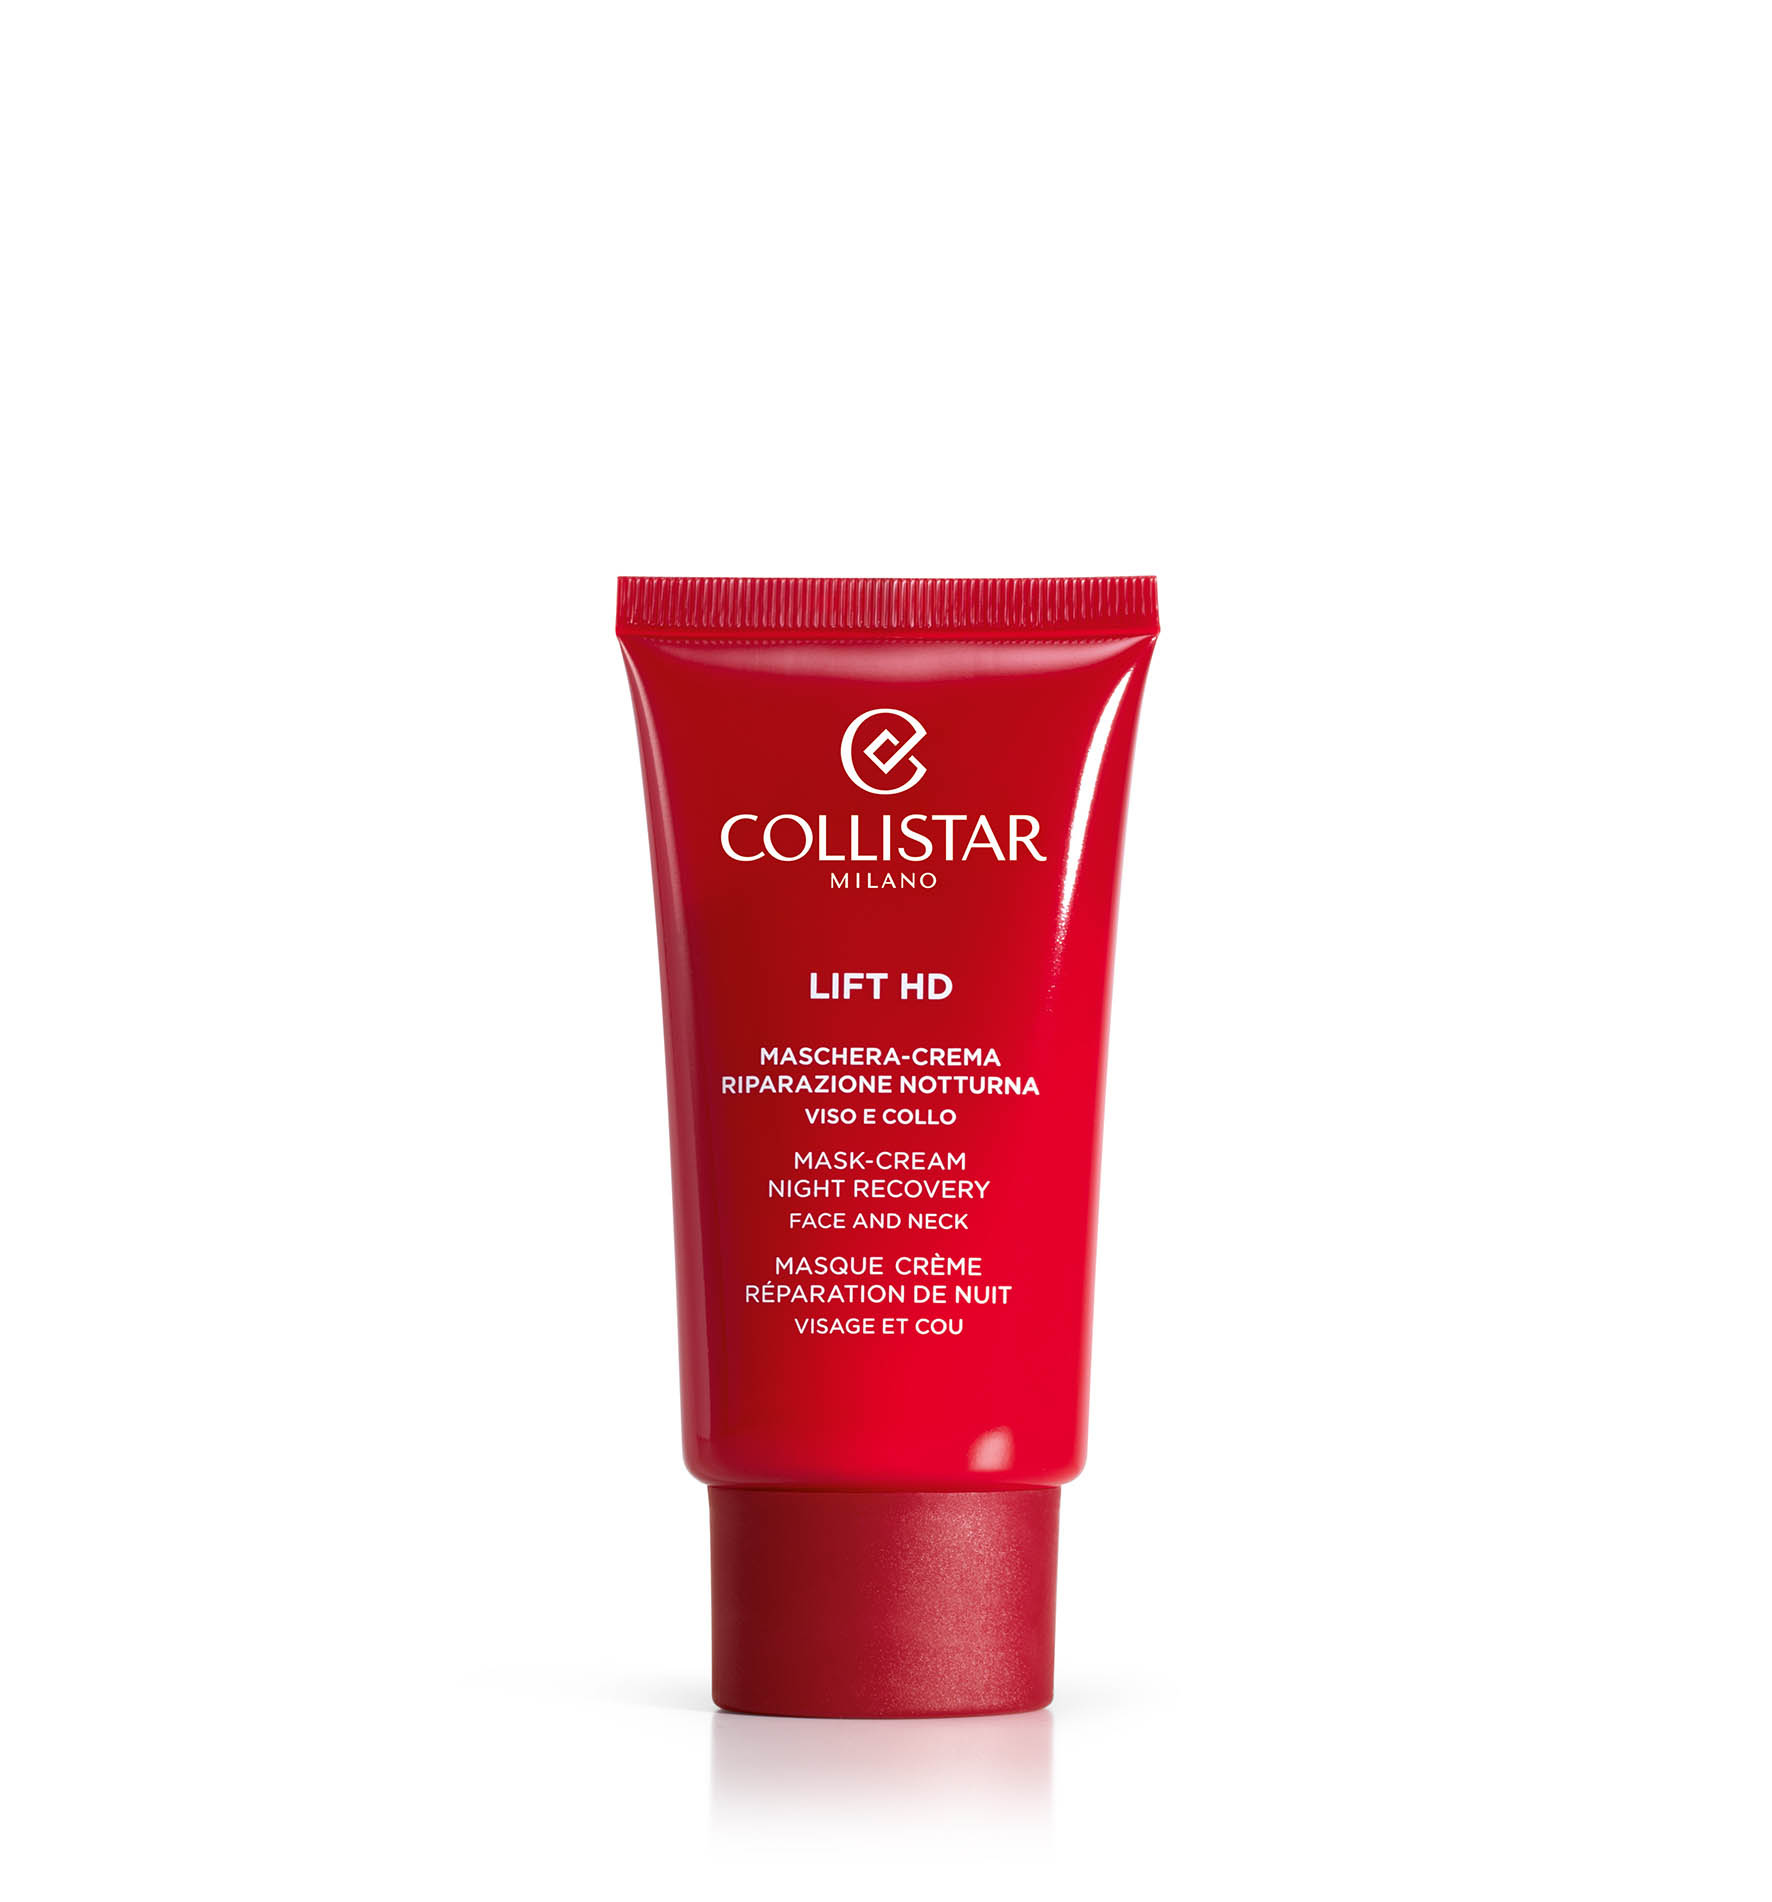 MASK-CREAM NIGHT RECOVERY FACE AND NECK - Lifting | Collistar - Shop Online Ufficiale